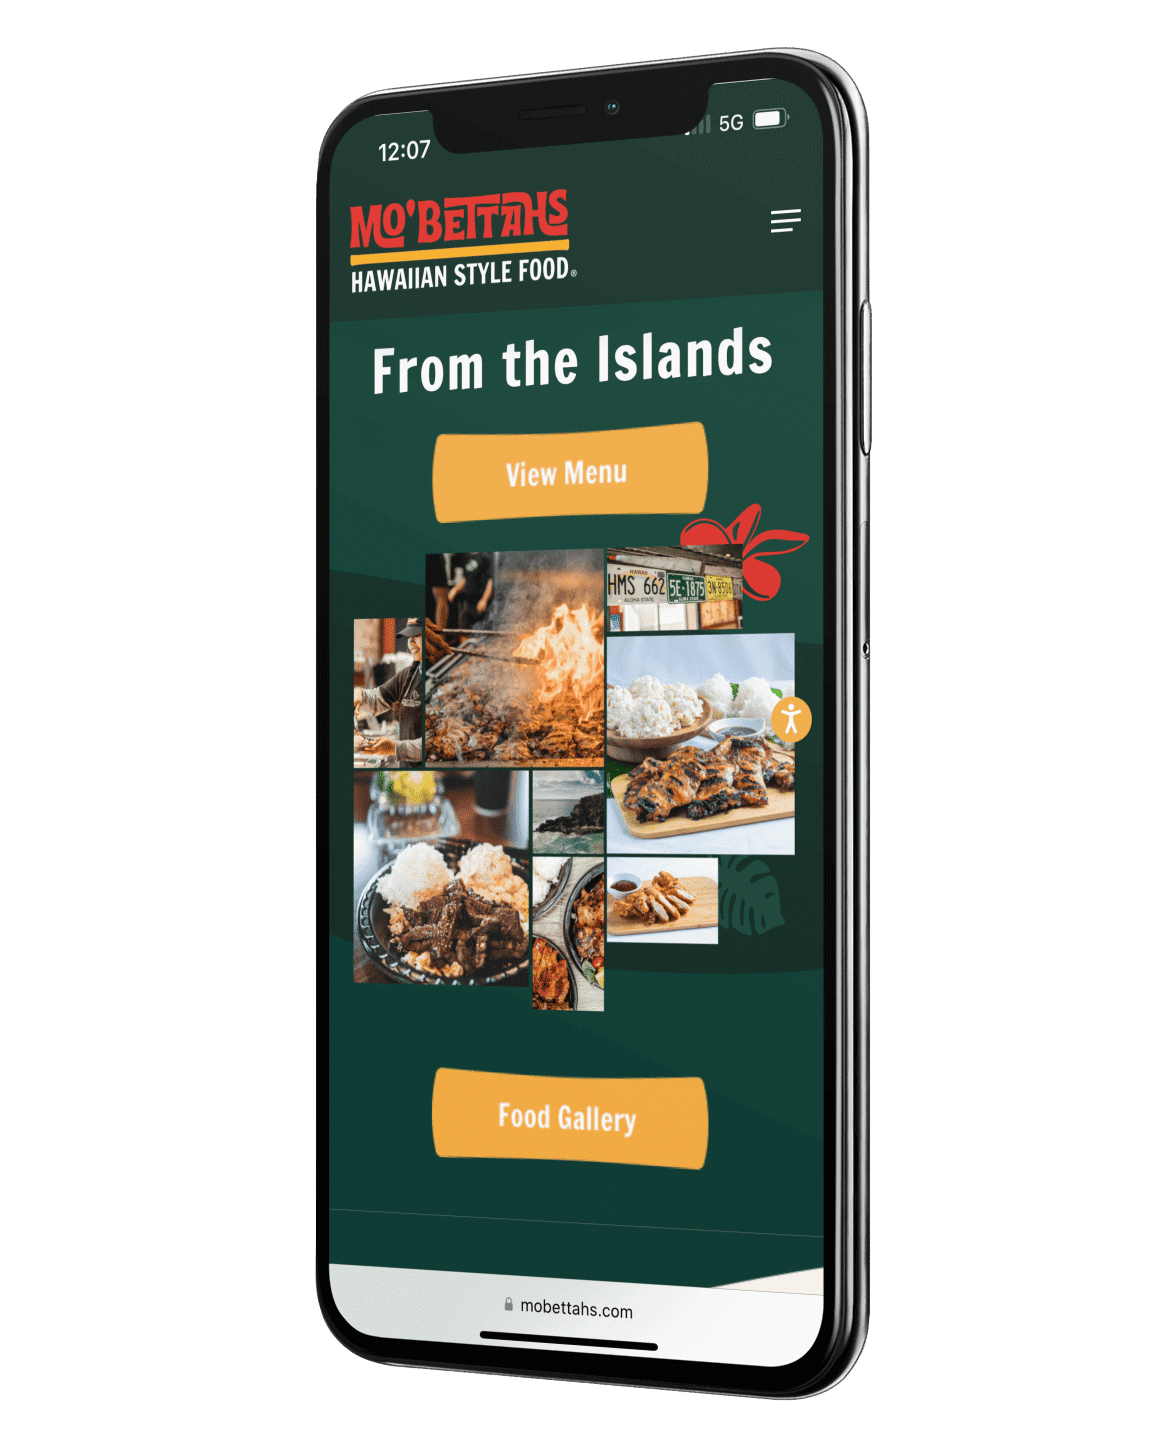 Mo'bettahs mobile mockup of food gallery and menu - Big Red Jelly web design firm Provo Utah